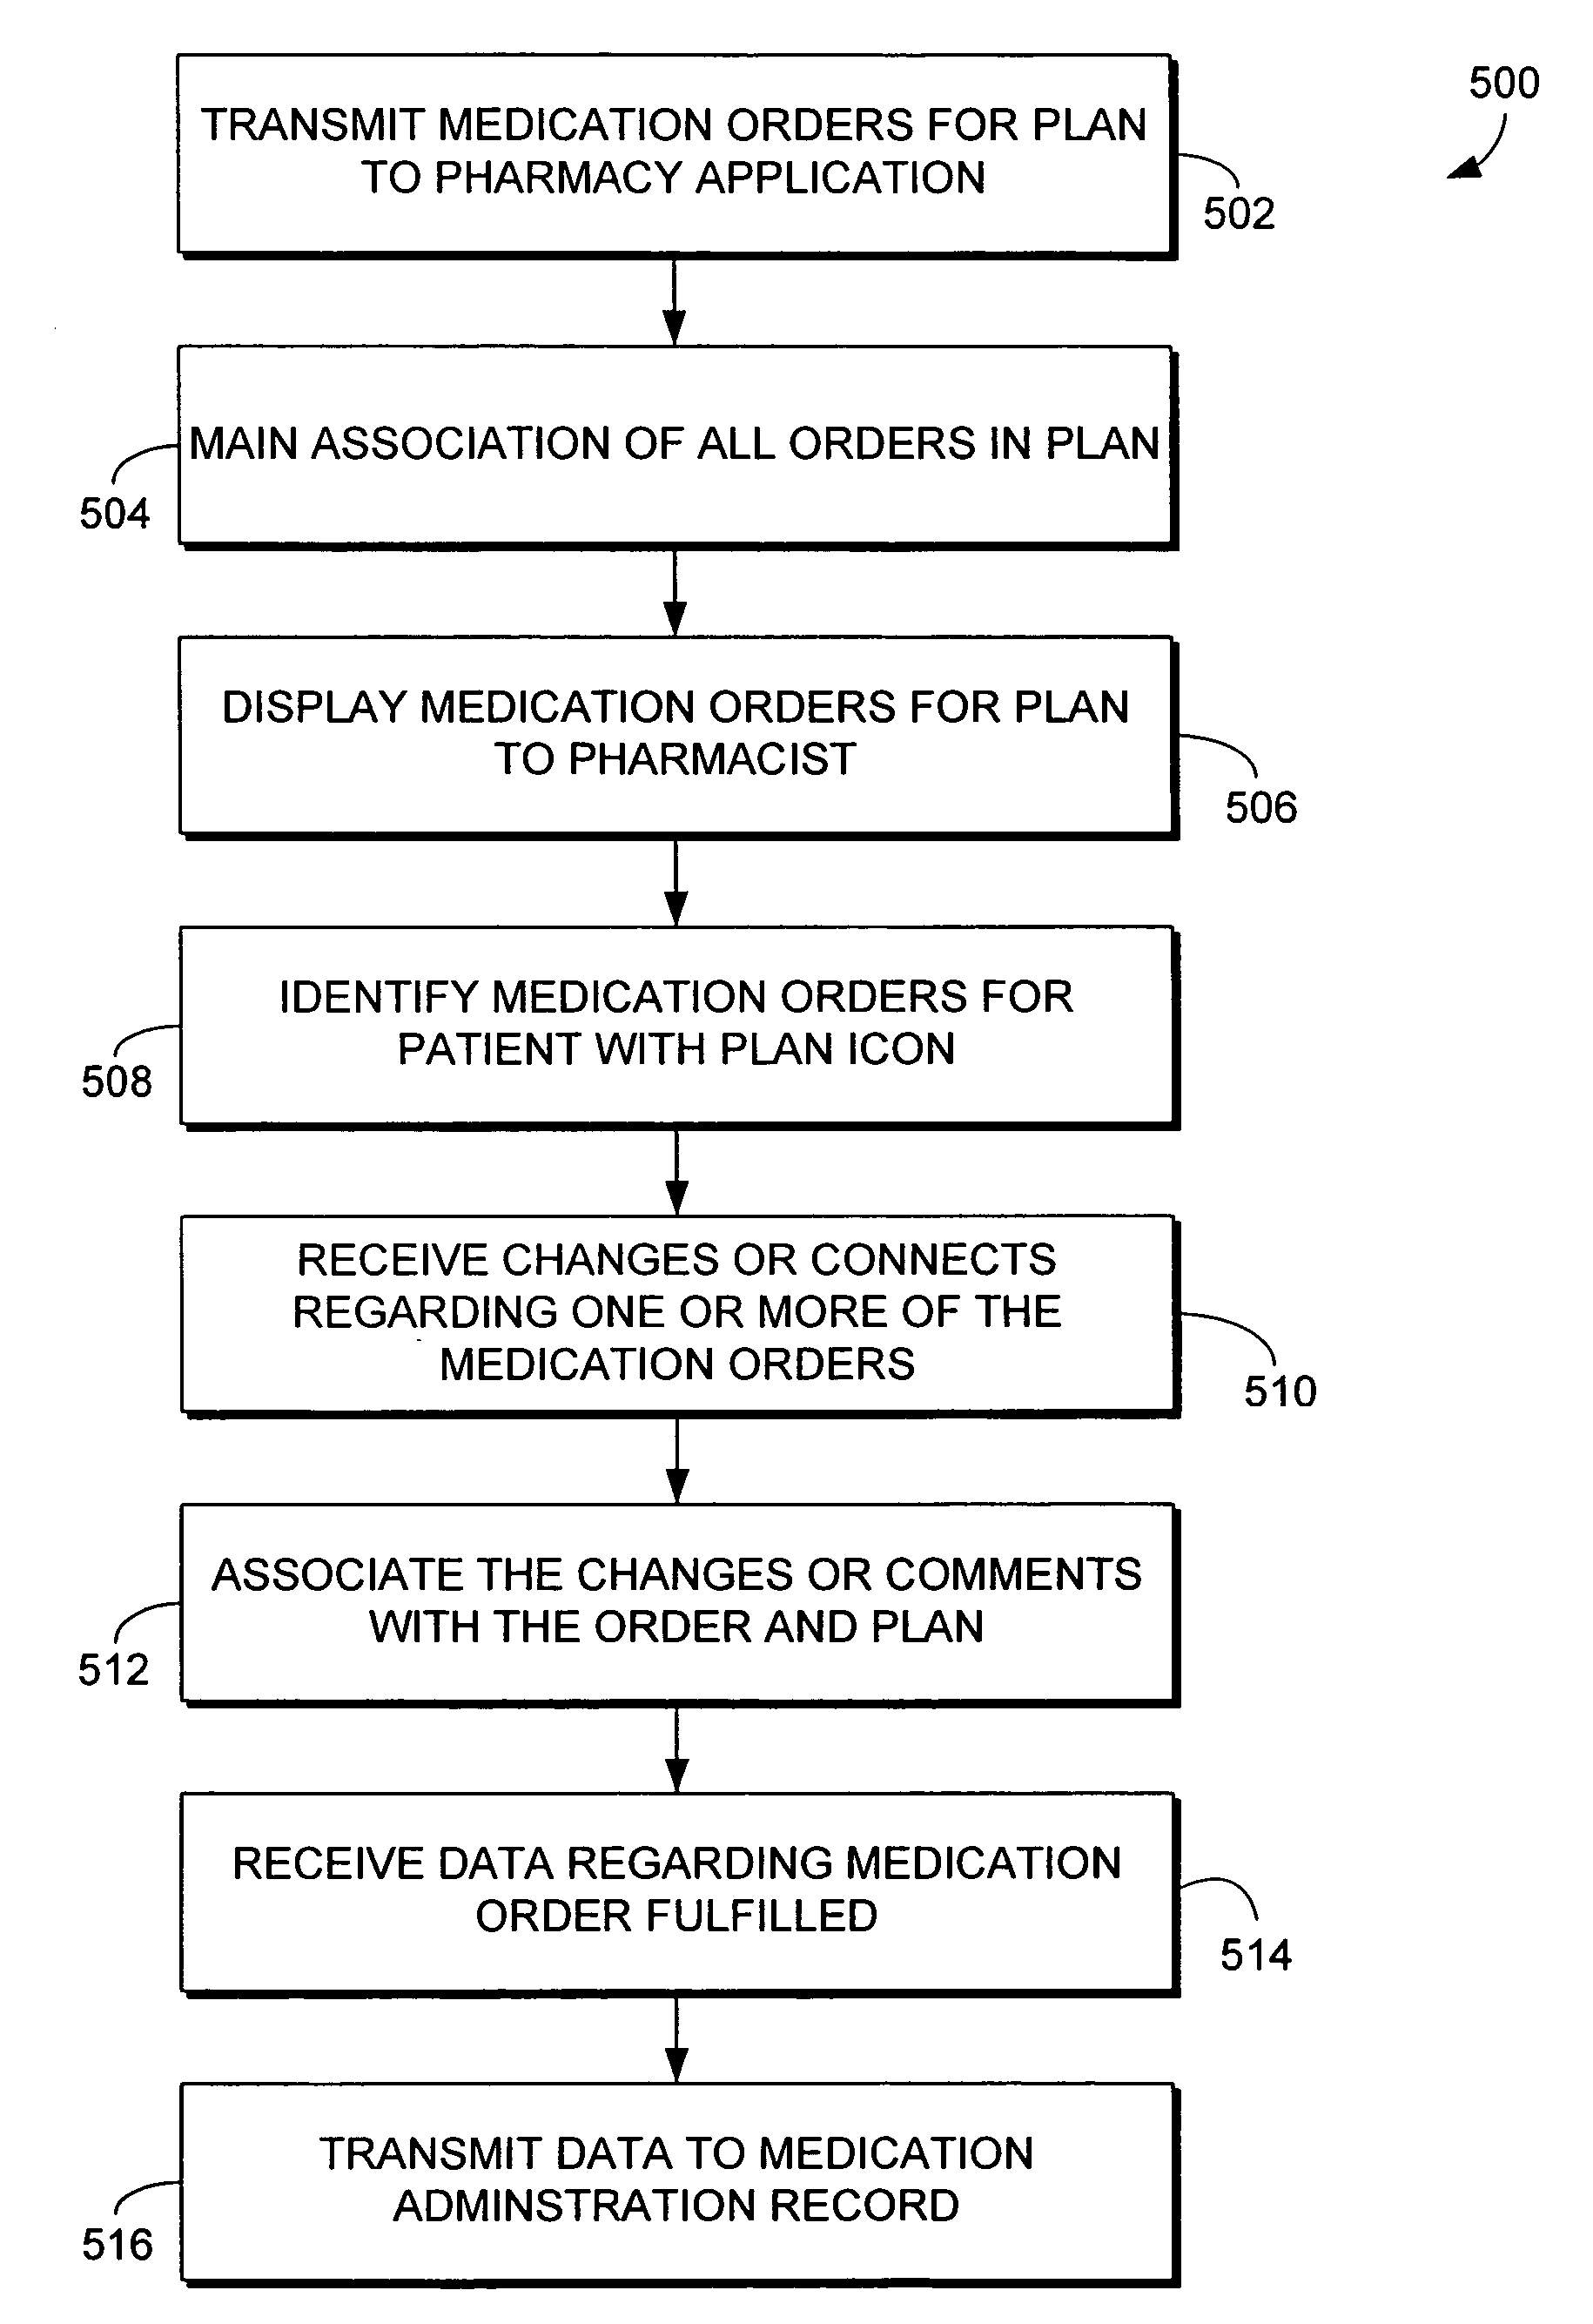 System and method for maintaining the association of healthcare orders in a healthcare plan in a computerized pharmacy application